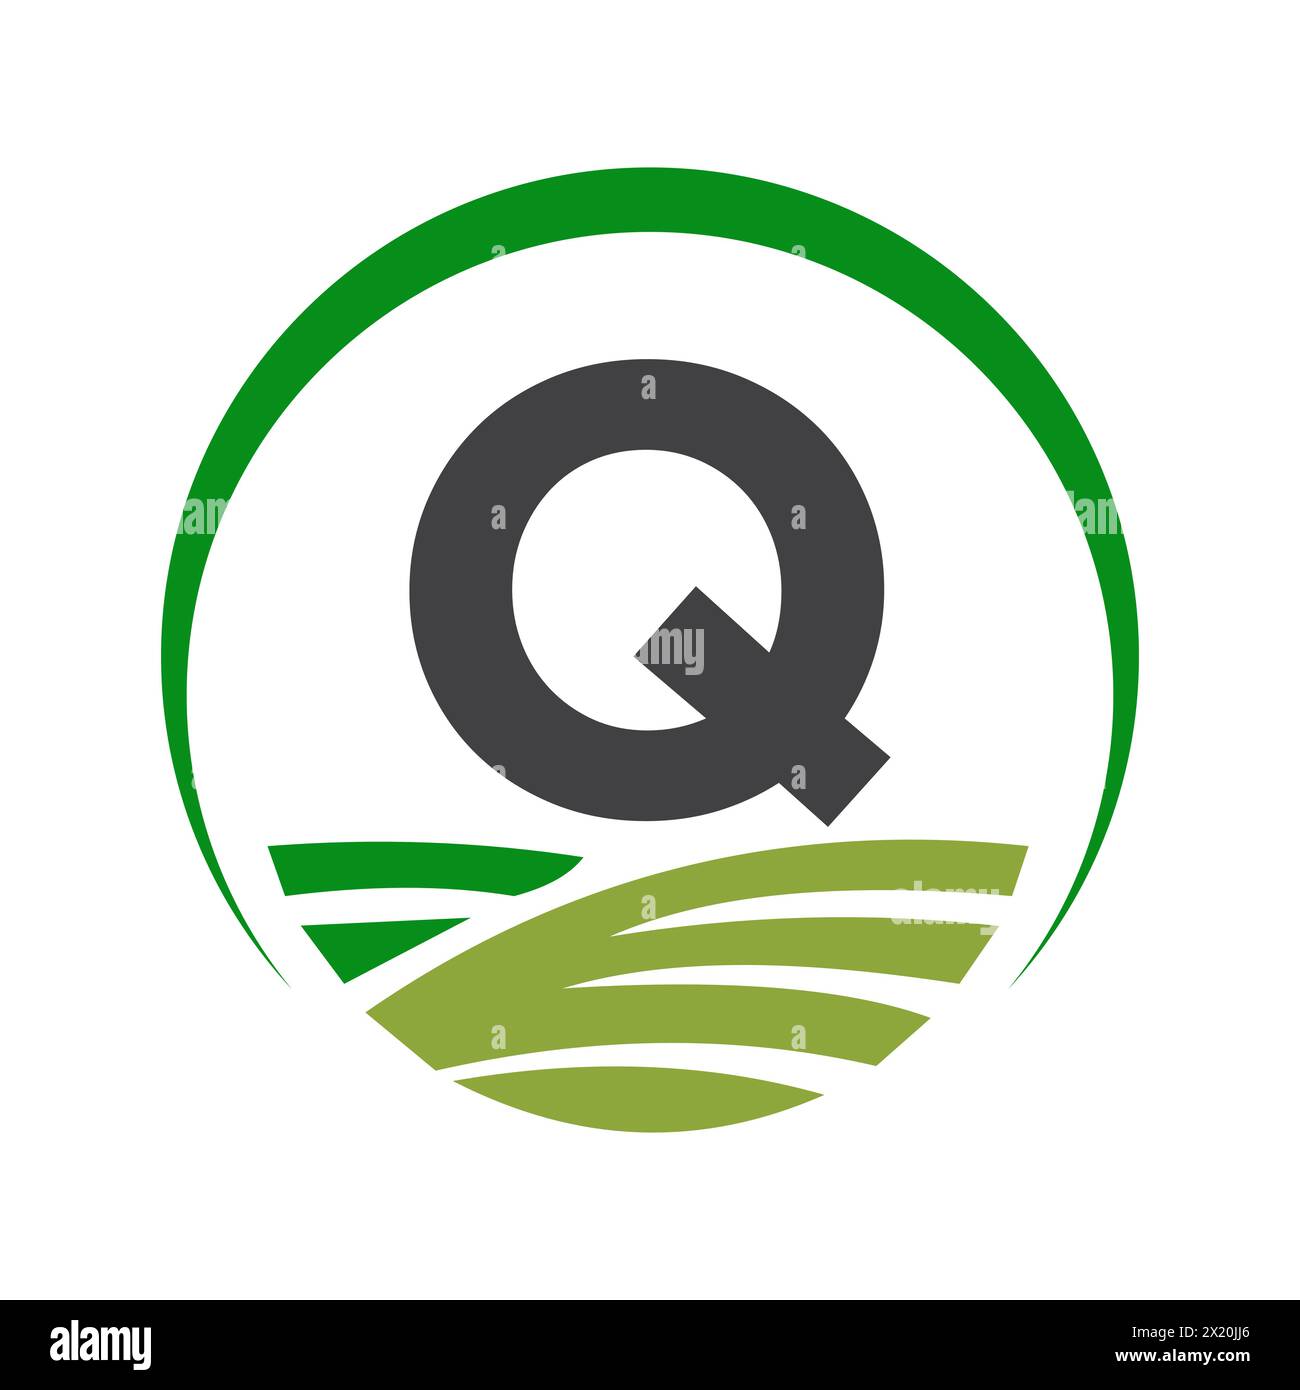 Agriculture Logo On Letter Q Concept For Farming Symbol Stock Vector